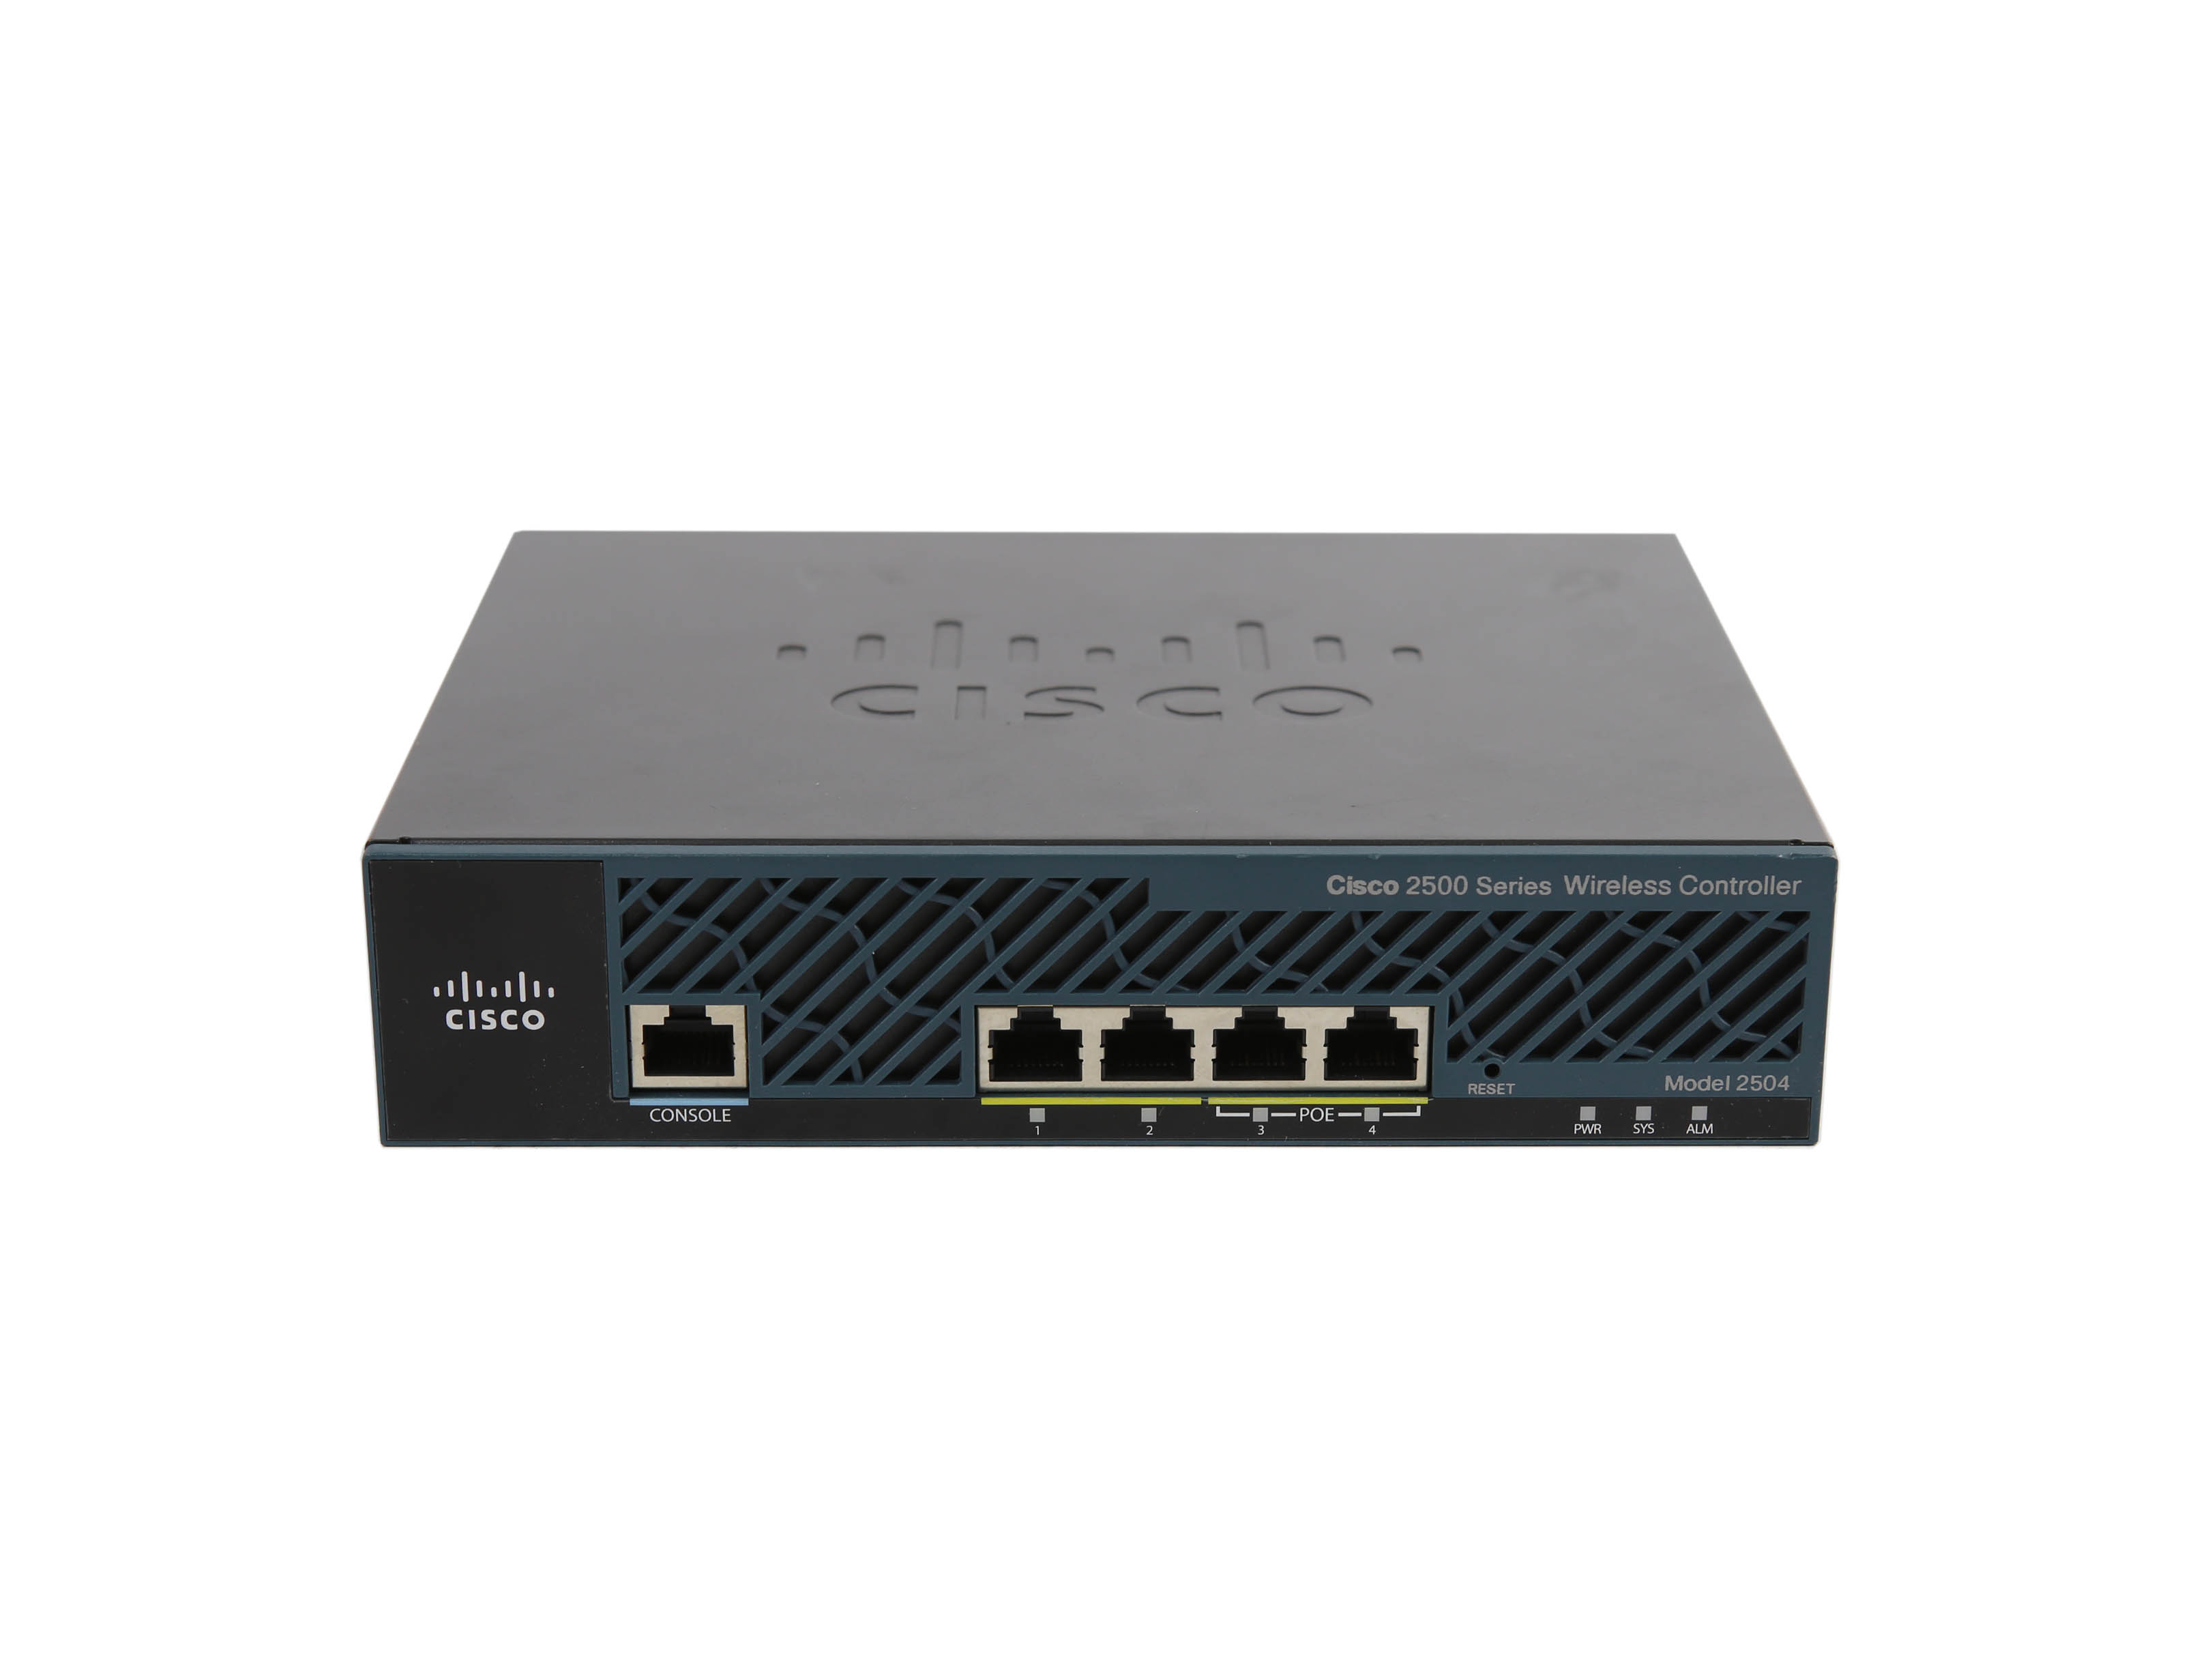 Wireless AIR-CT2504-K9 V03 15AP NO AC Cisco 2500 Series Wireless Controller 4Ports 1000Mbit (2Ports PoE) Without External Power Supply 15AP Managed